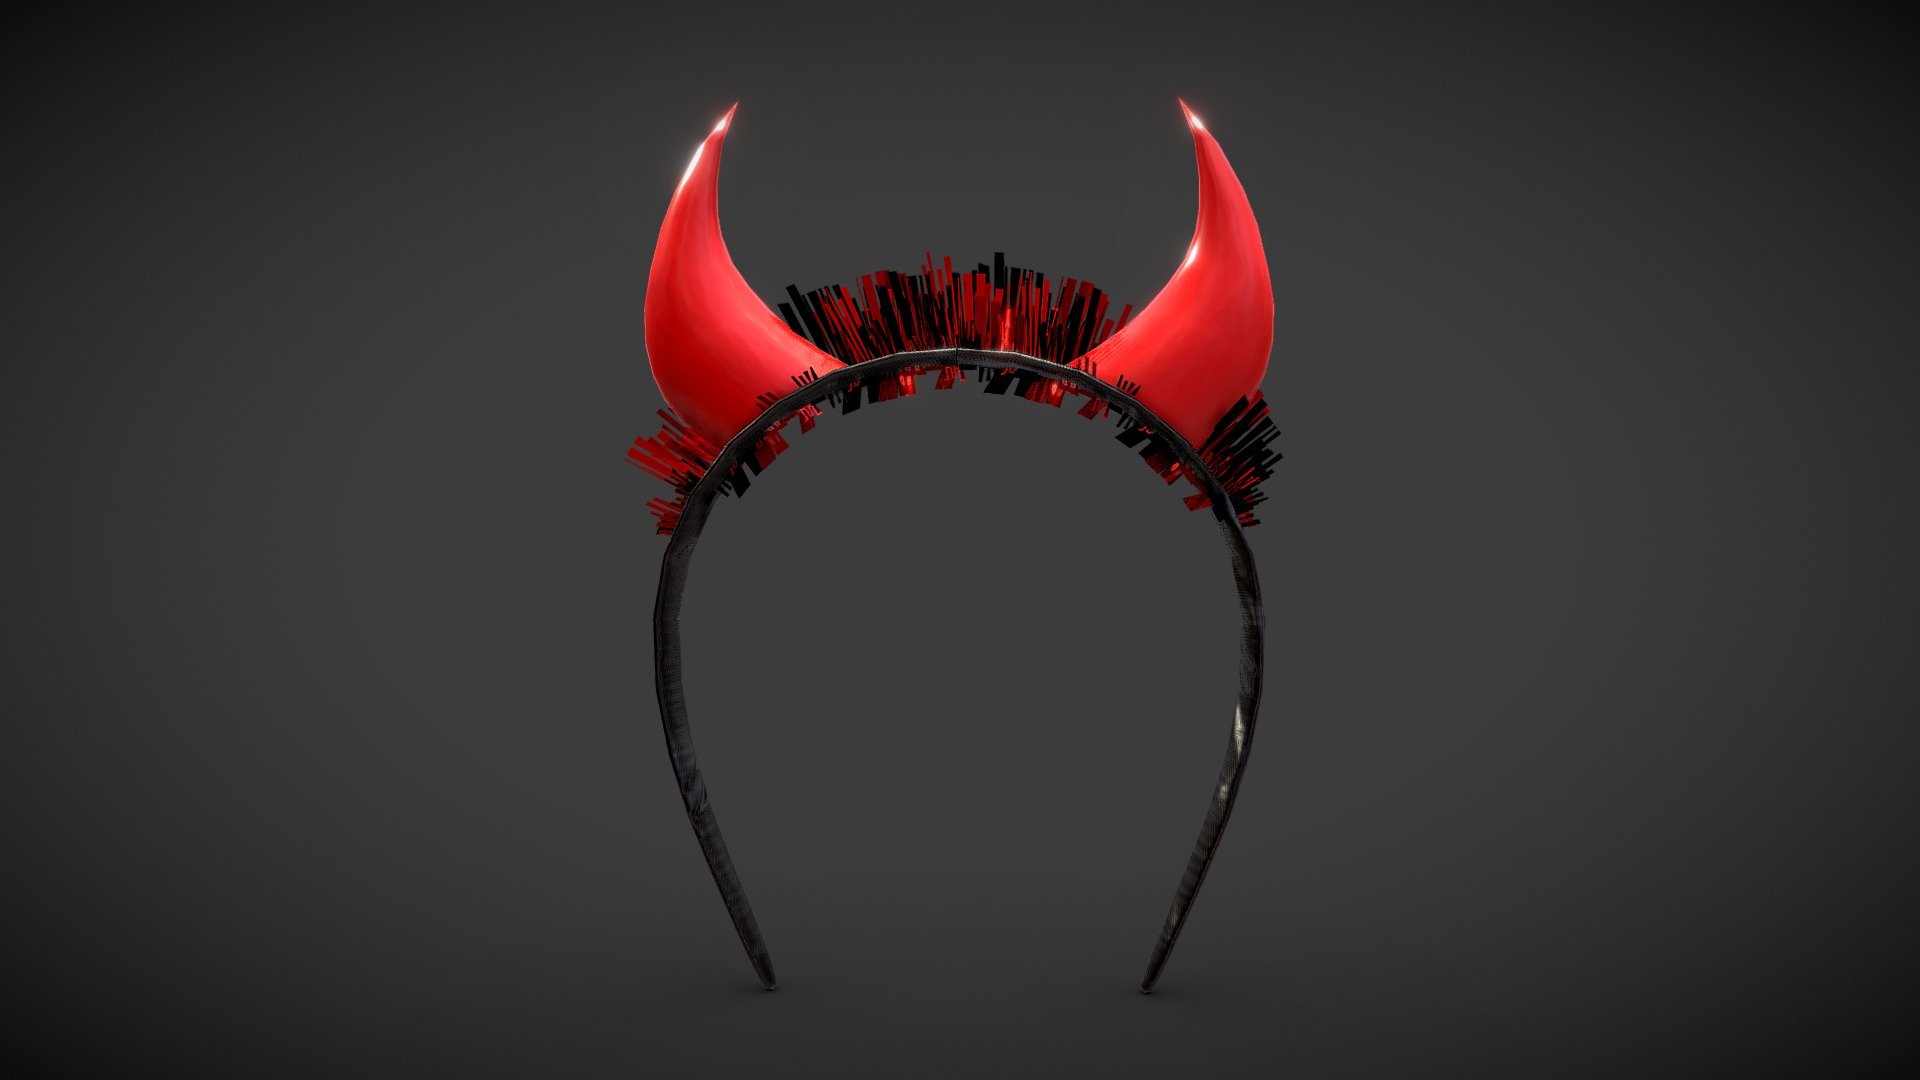 Devil Horns Headband - low poly

4096x4096 PNG texture

Triangles: 3k
Vertices: 2.1k




my party / birthday collection &lt;&lt;

Hats - Headwear &lt;&lt;
 - Devil Headband - low poly - Buy Royalty Free 3D model by Karolina Renkiewicz (@KarolinaRenkiewicz) 3d model